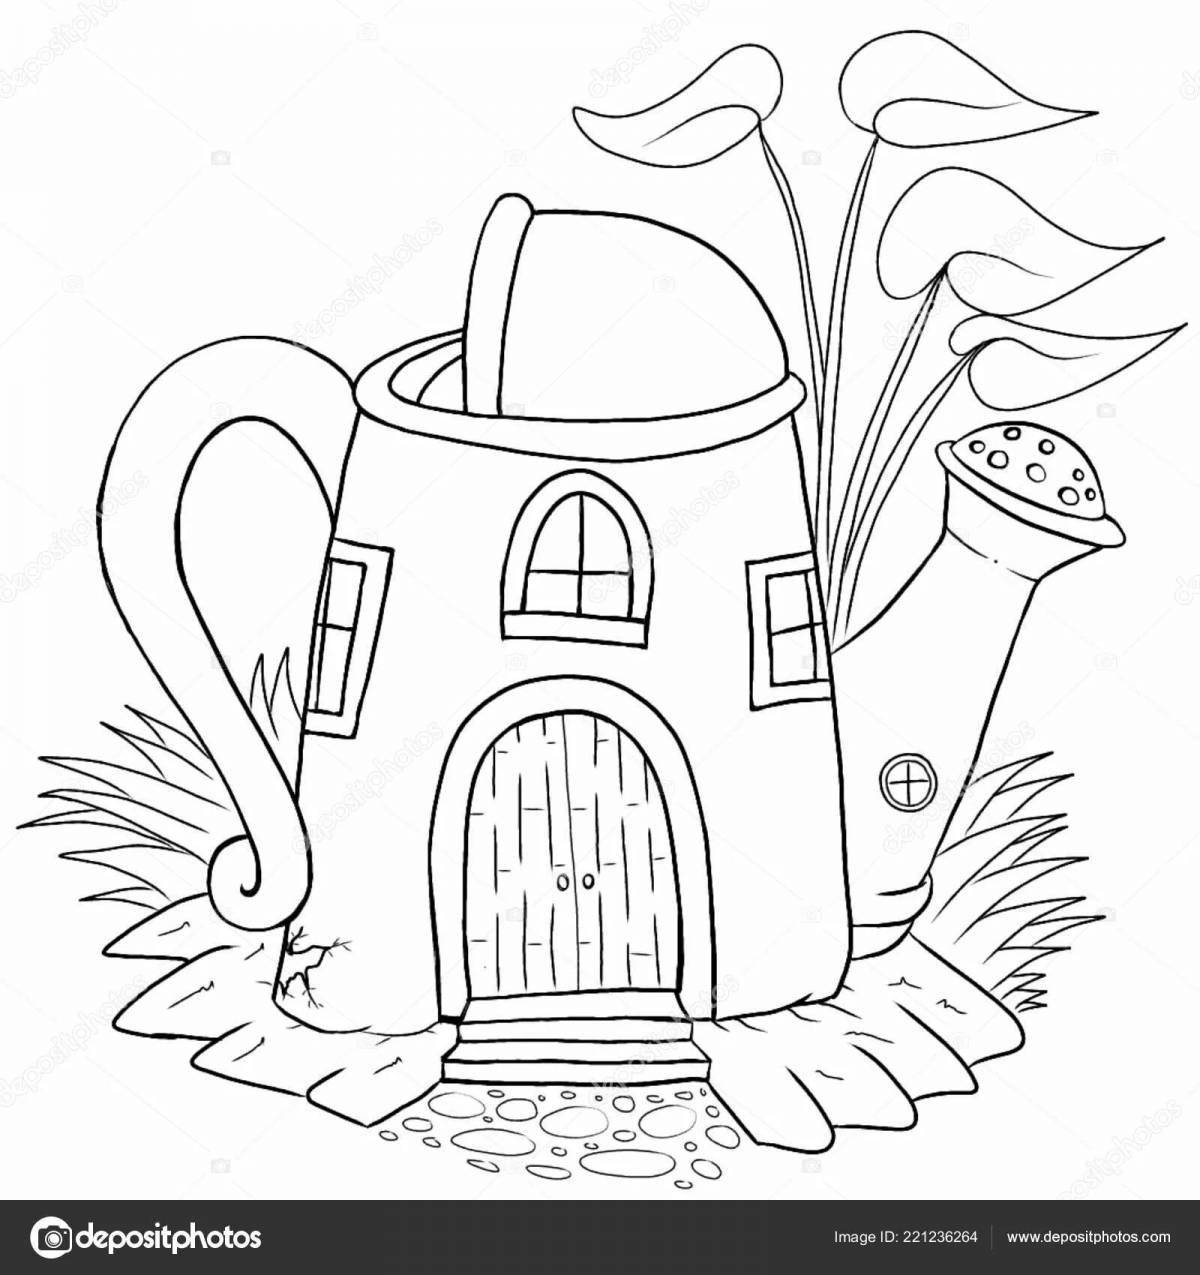 Coloring fairy house